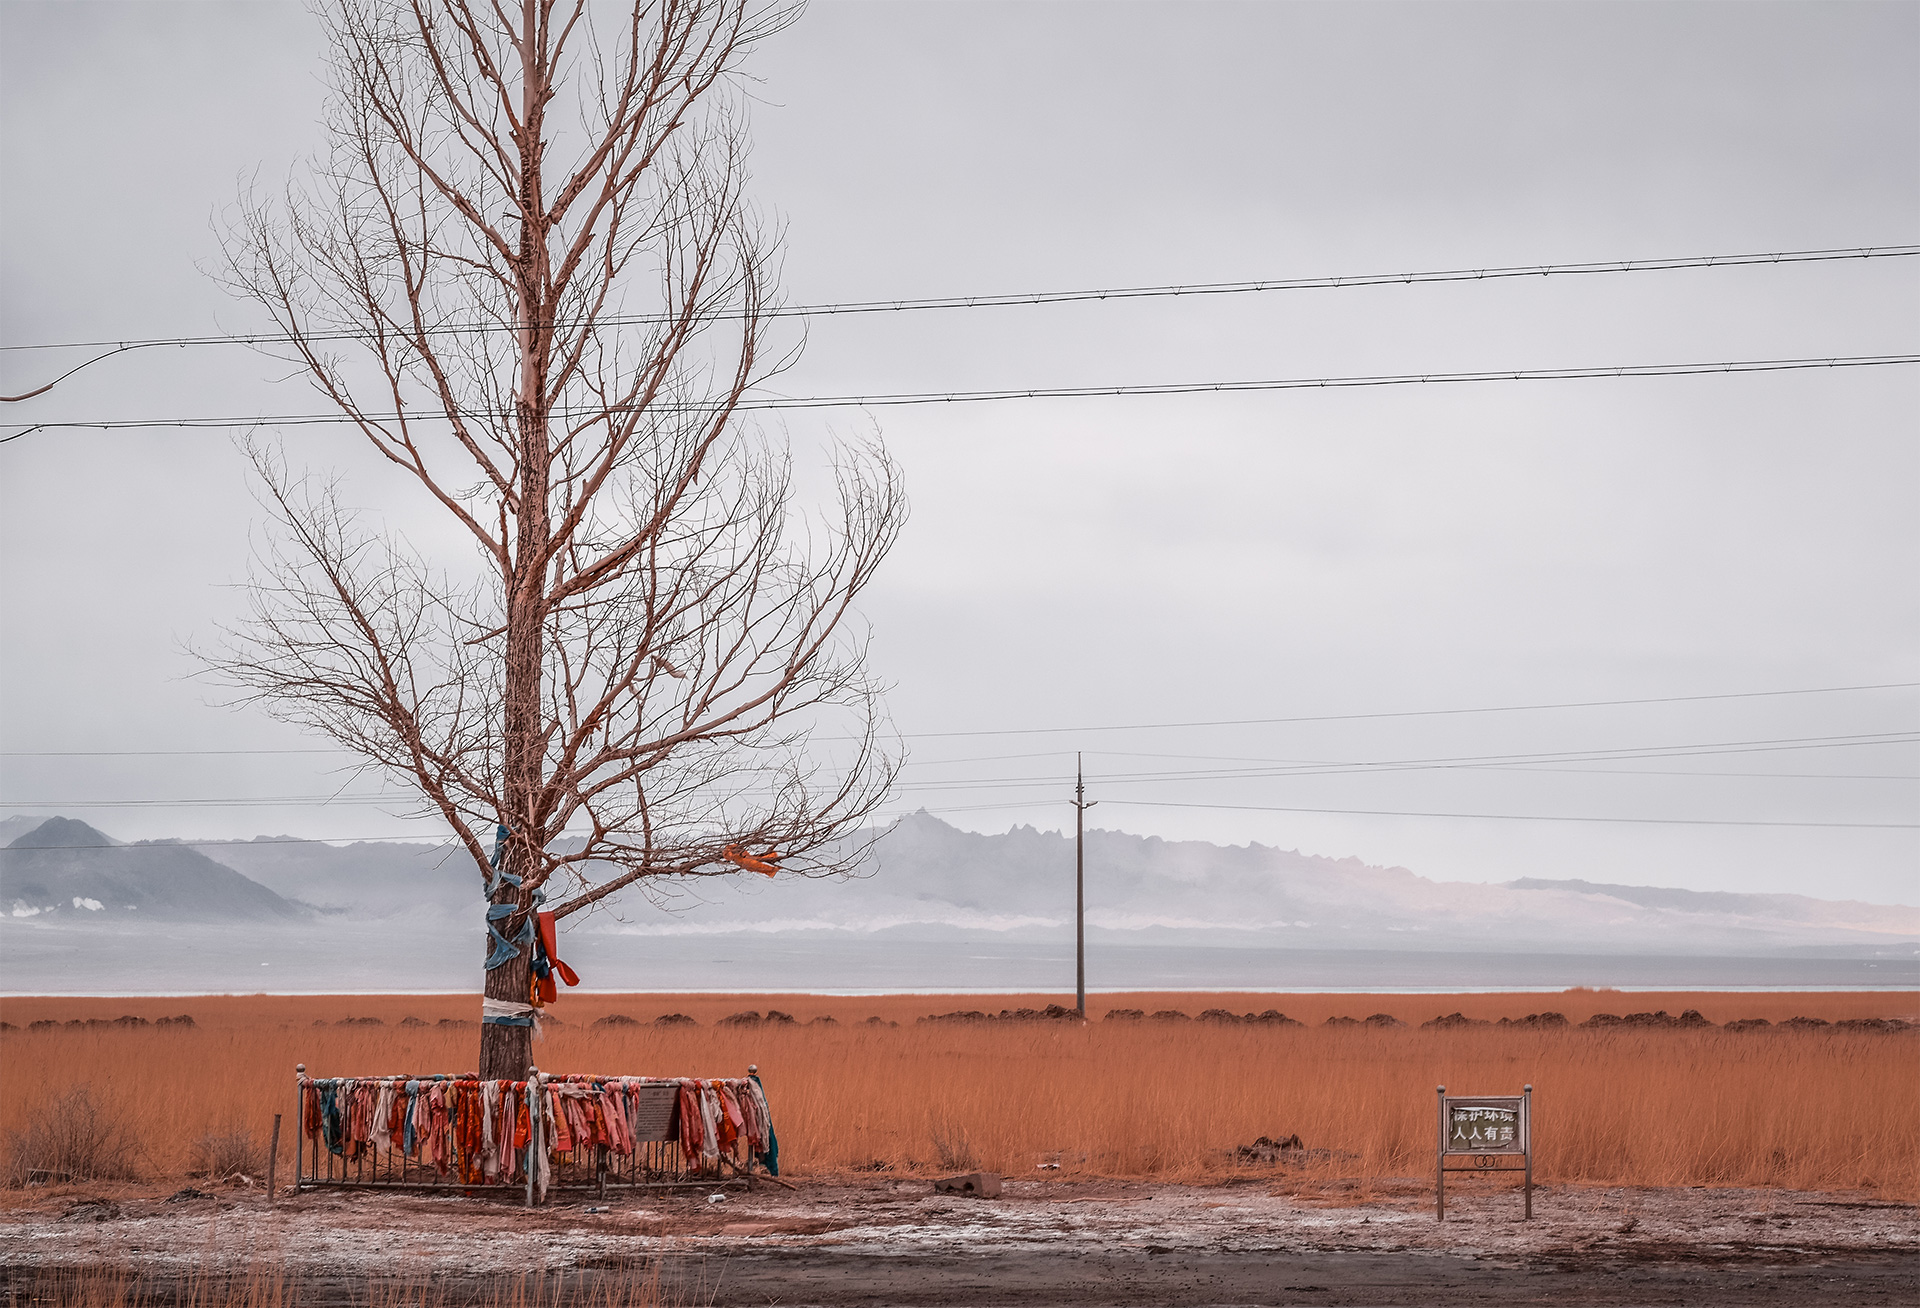 A landscape showing a bare tree and scarves tied around its trunk in Tibet